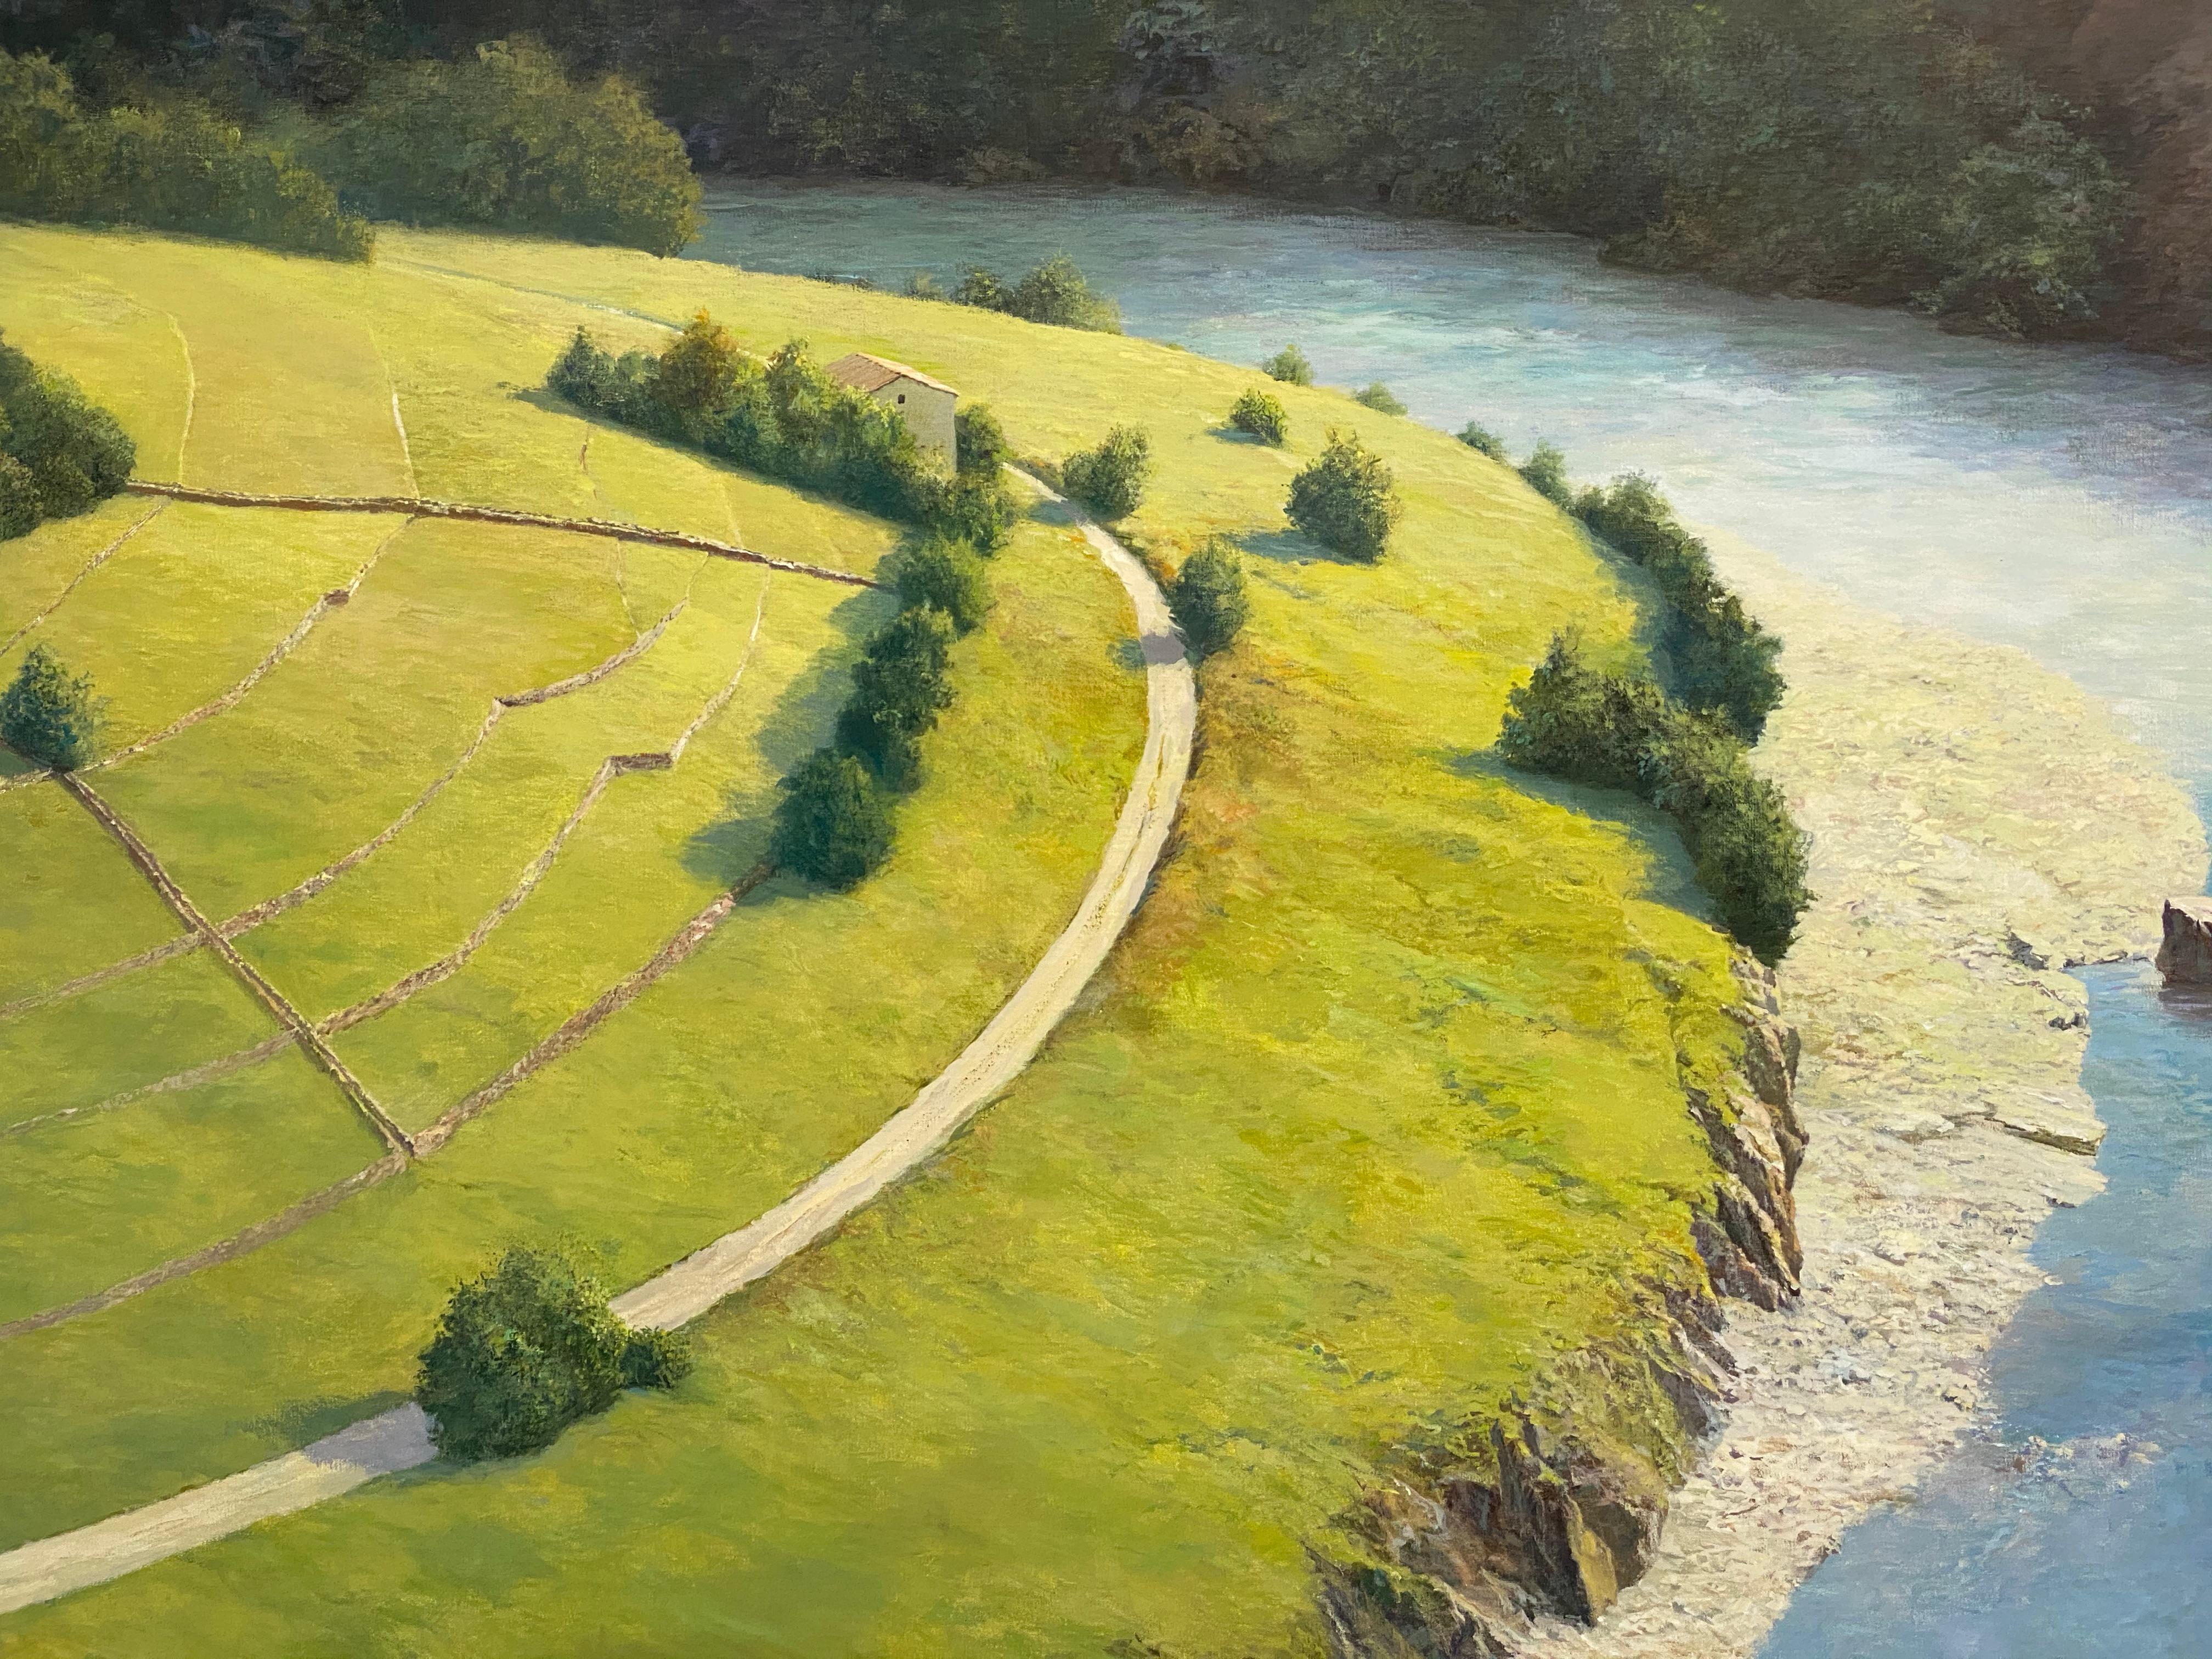 Peter Durieux
Breathtaking Ardeche
100 x 200 cm
Framed 105 x 210 cm
Acrylic on canvas

The work of Durieux has been characterized in the last 25 years by the tranquil French landscapes. His enthusiasts enjoy it and stand in the gallery with their